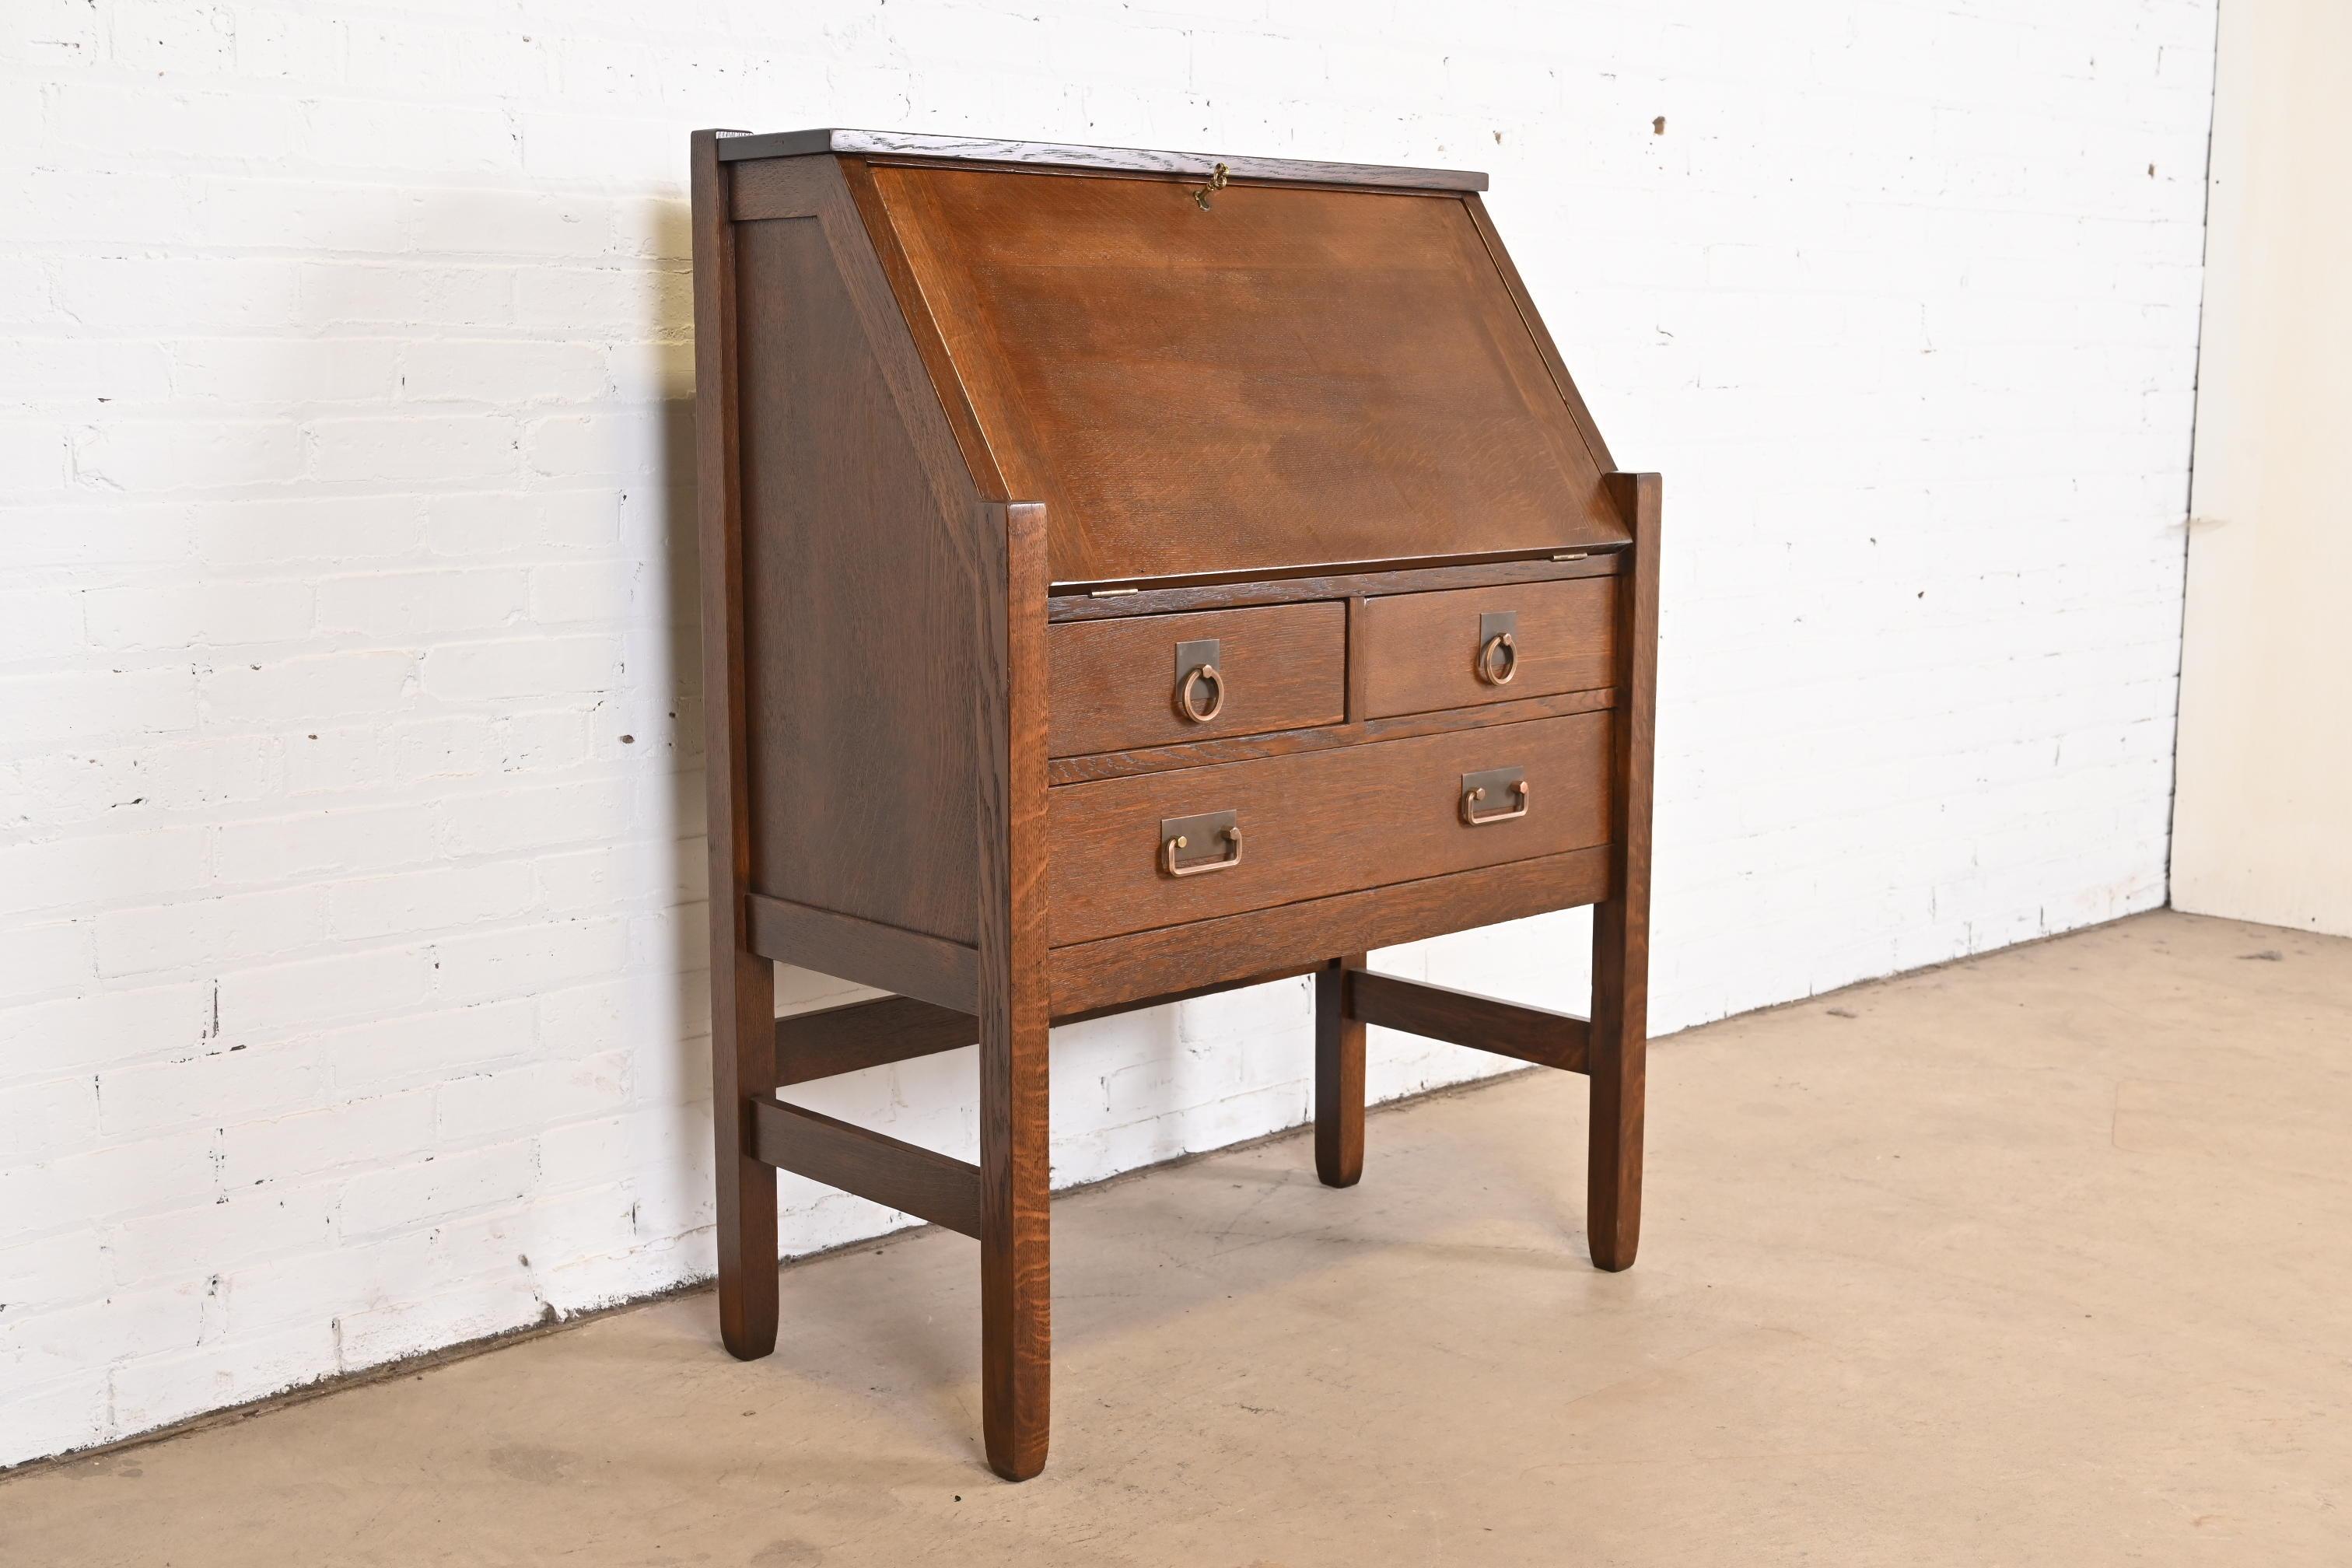 A gorgeous antique Mission or Arts & Crafts slant front writing desk

By Stickley Brothers

USA, Early 20th Century

Quarter sawn oak, with original hammered copper hardware. Desk locks, and key is included.

Measures: 33.63